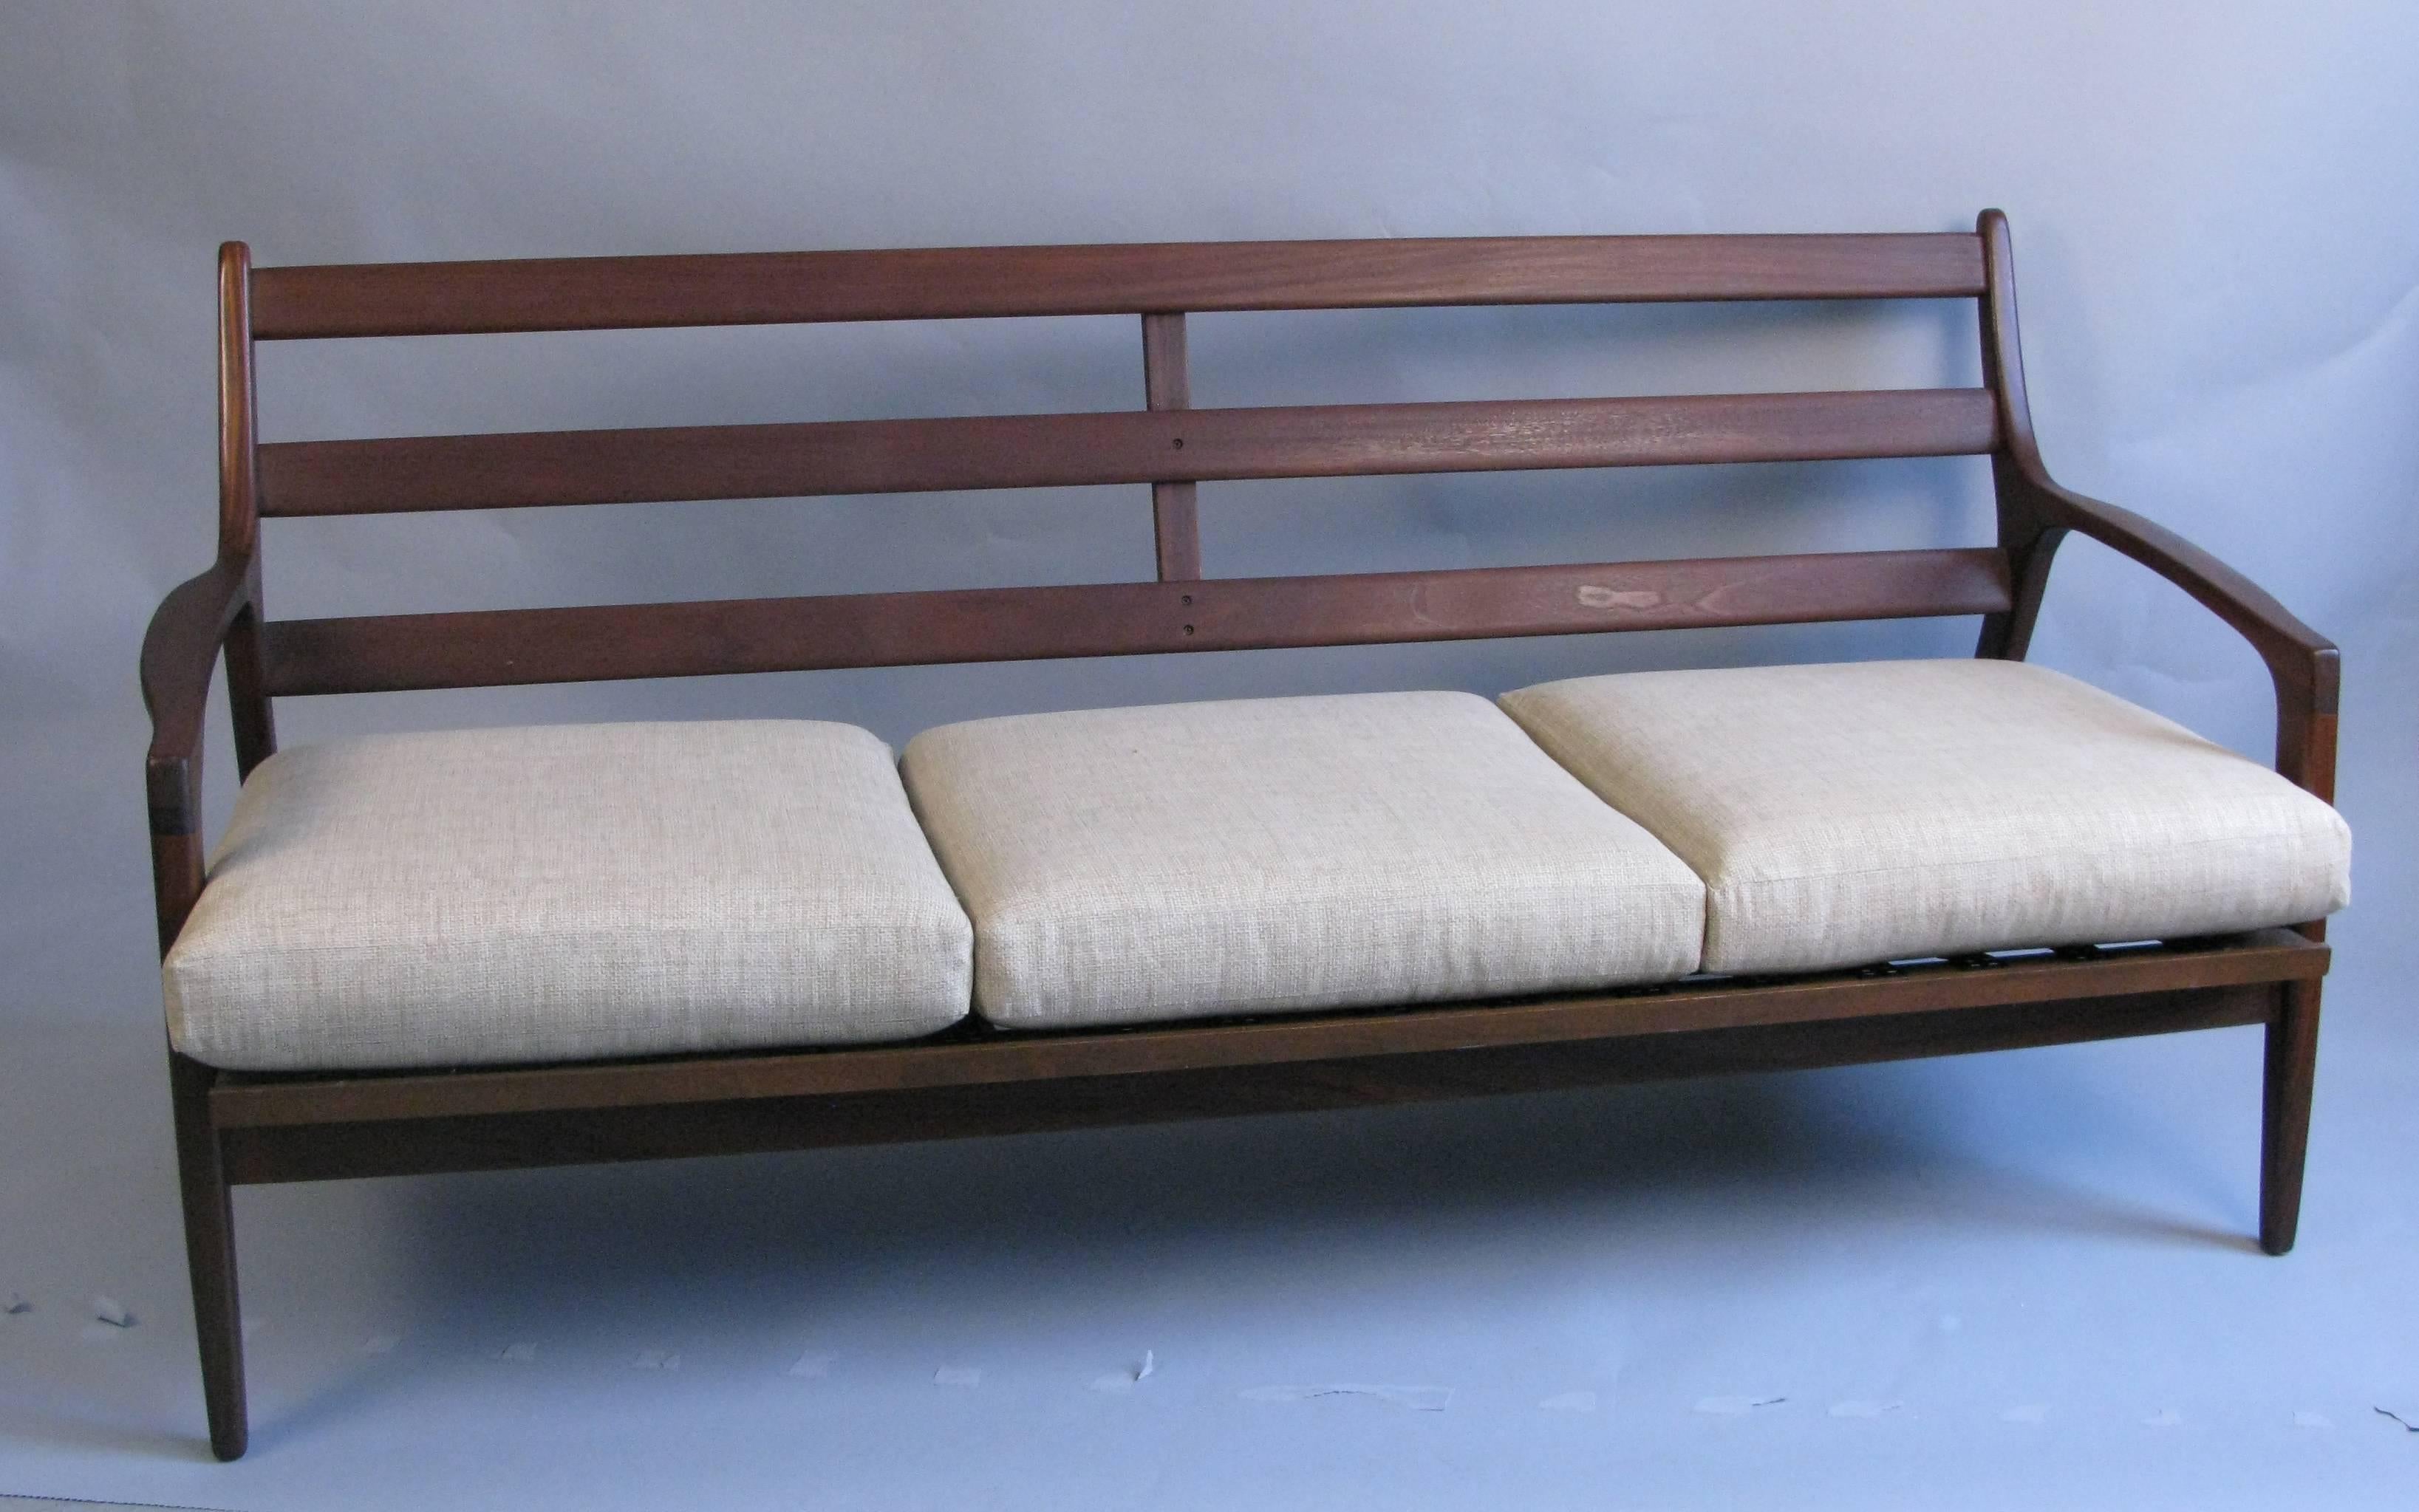 A good looking mid century mahogany sofa. Very nice lines and very sturdy construction. The sofa is quite comfortable. I believe the sofa to be American in design.